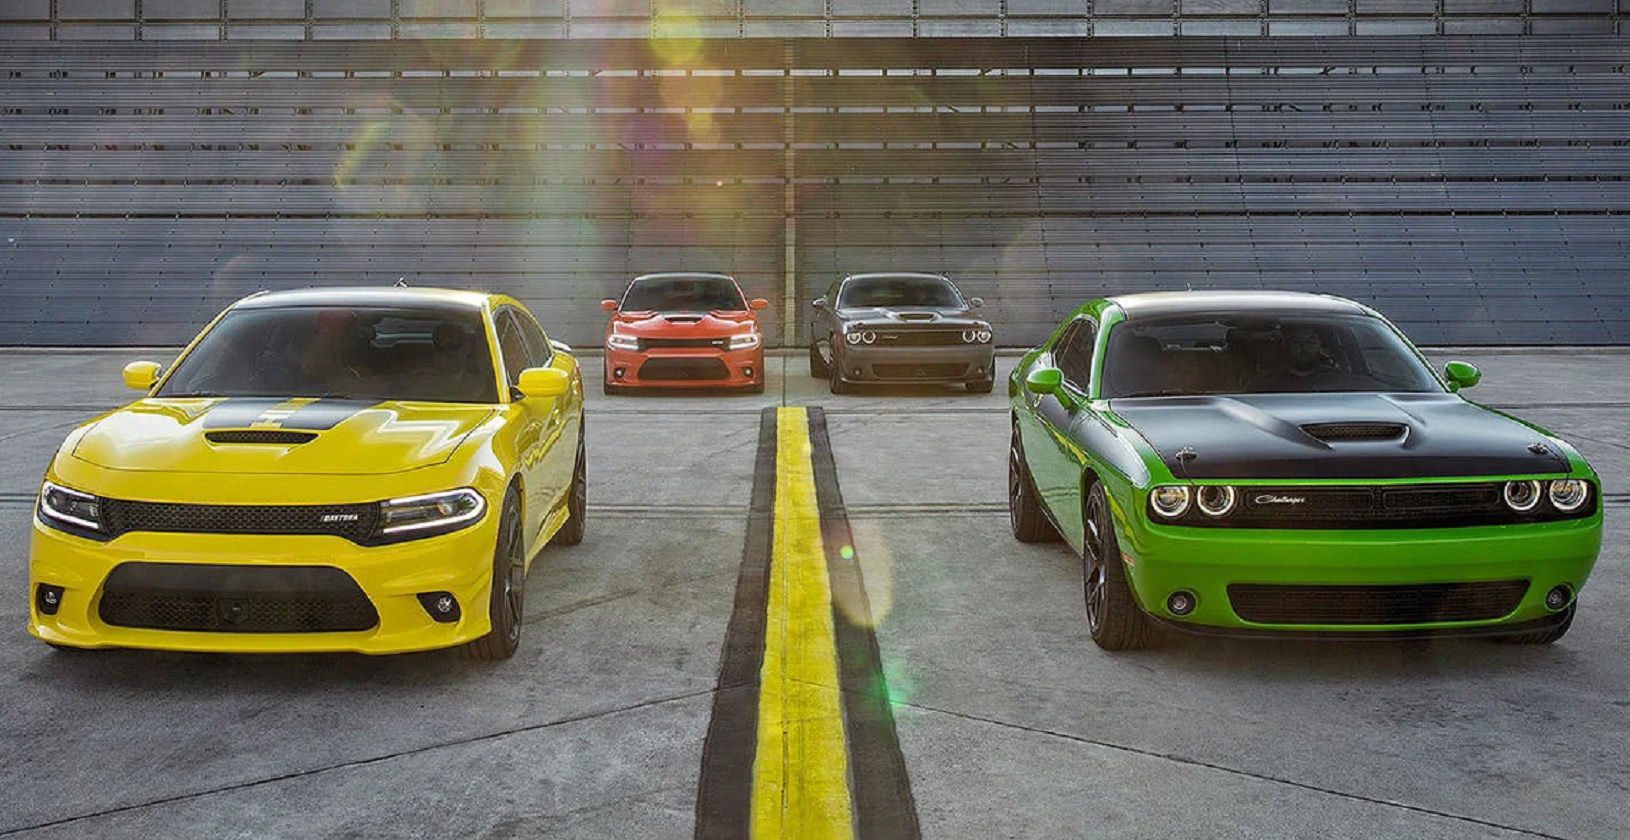 Challengers and chargers lined up